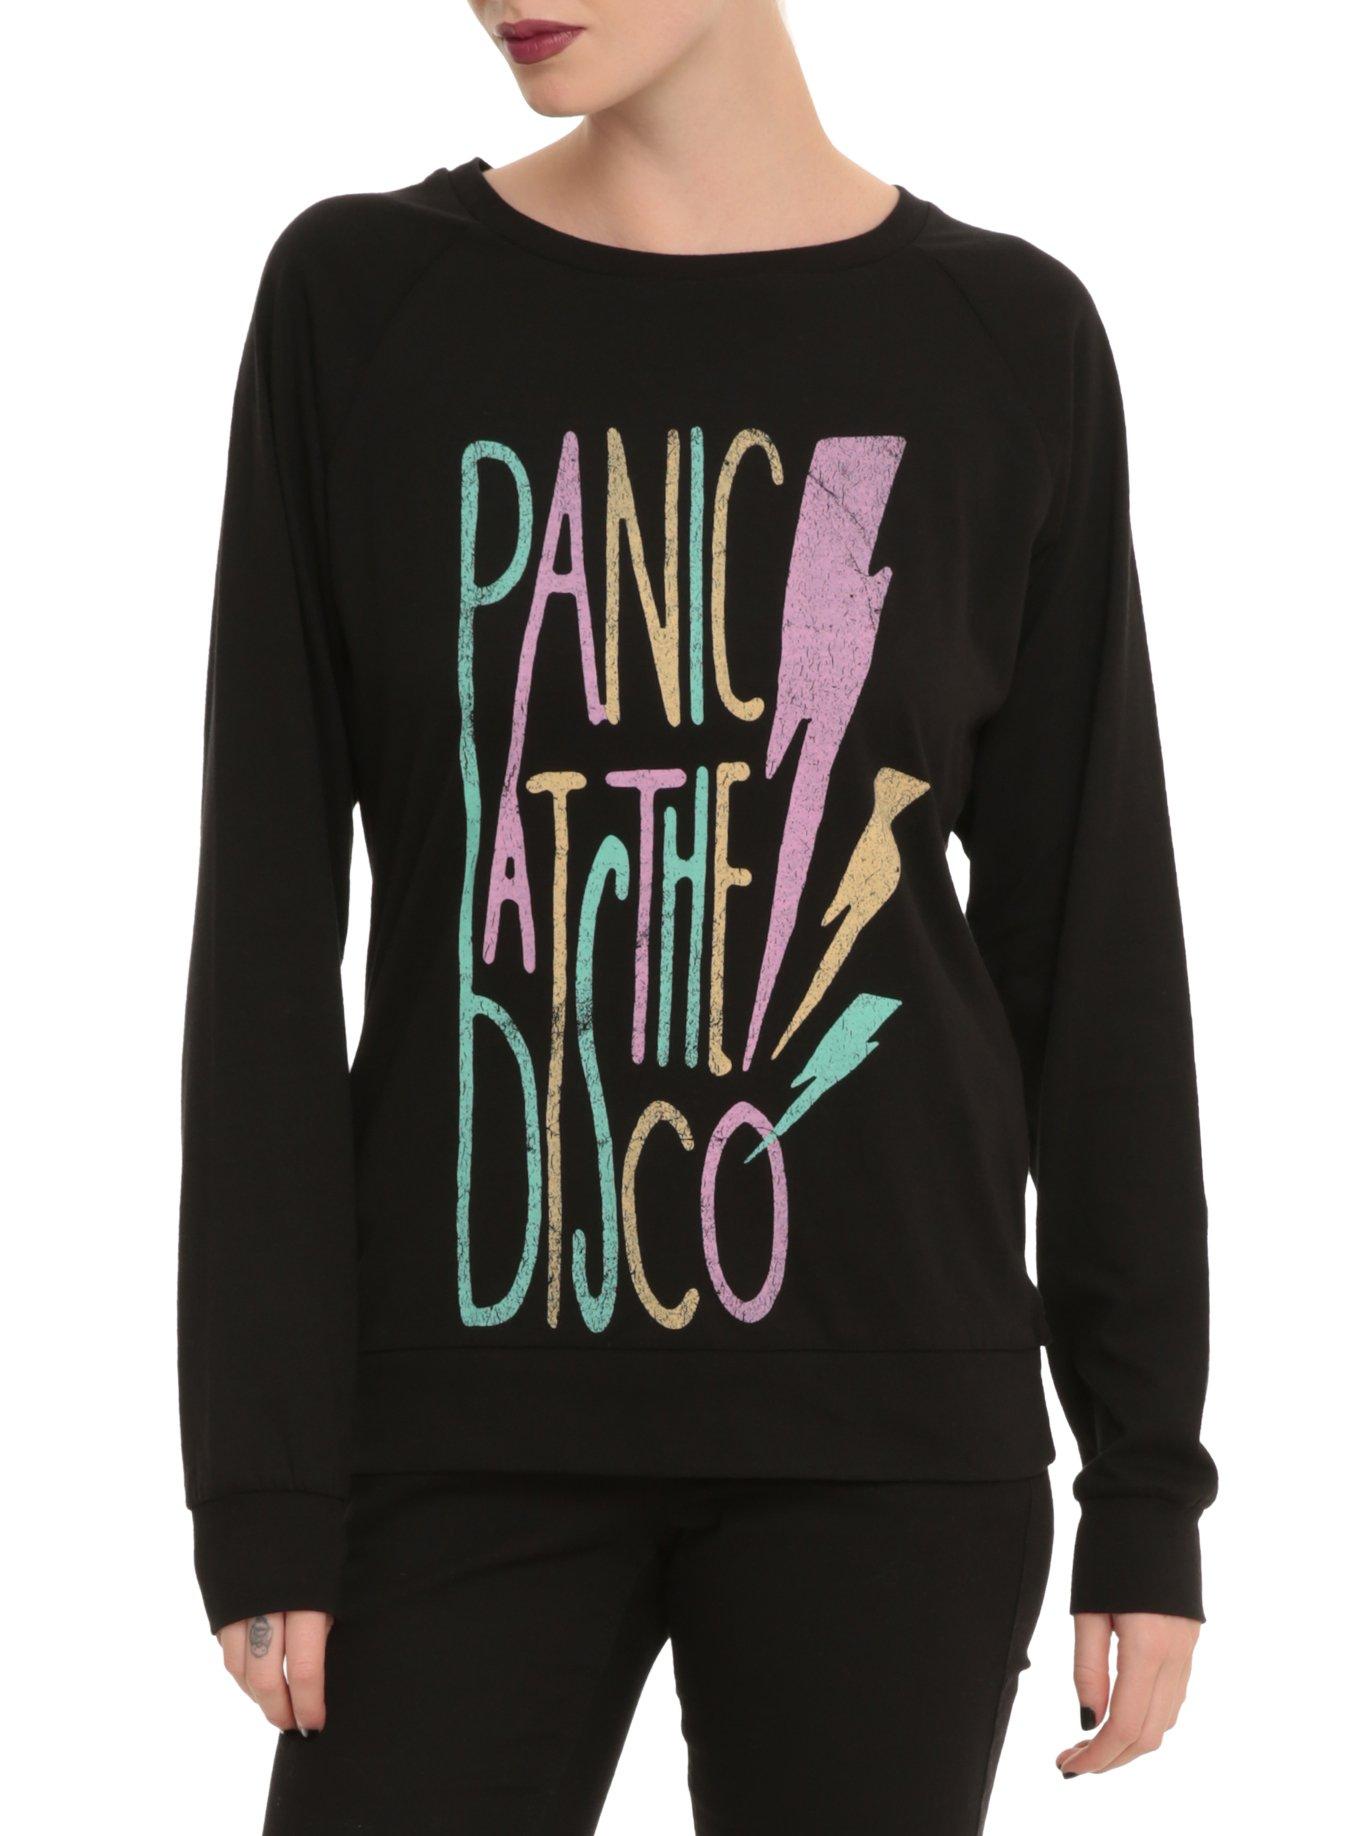 Panic! At The Disco Lightning Bolt Pullover Top, BLACK, hi-res